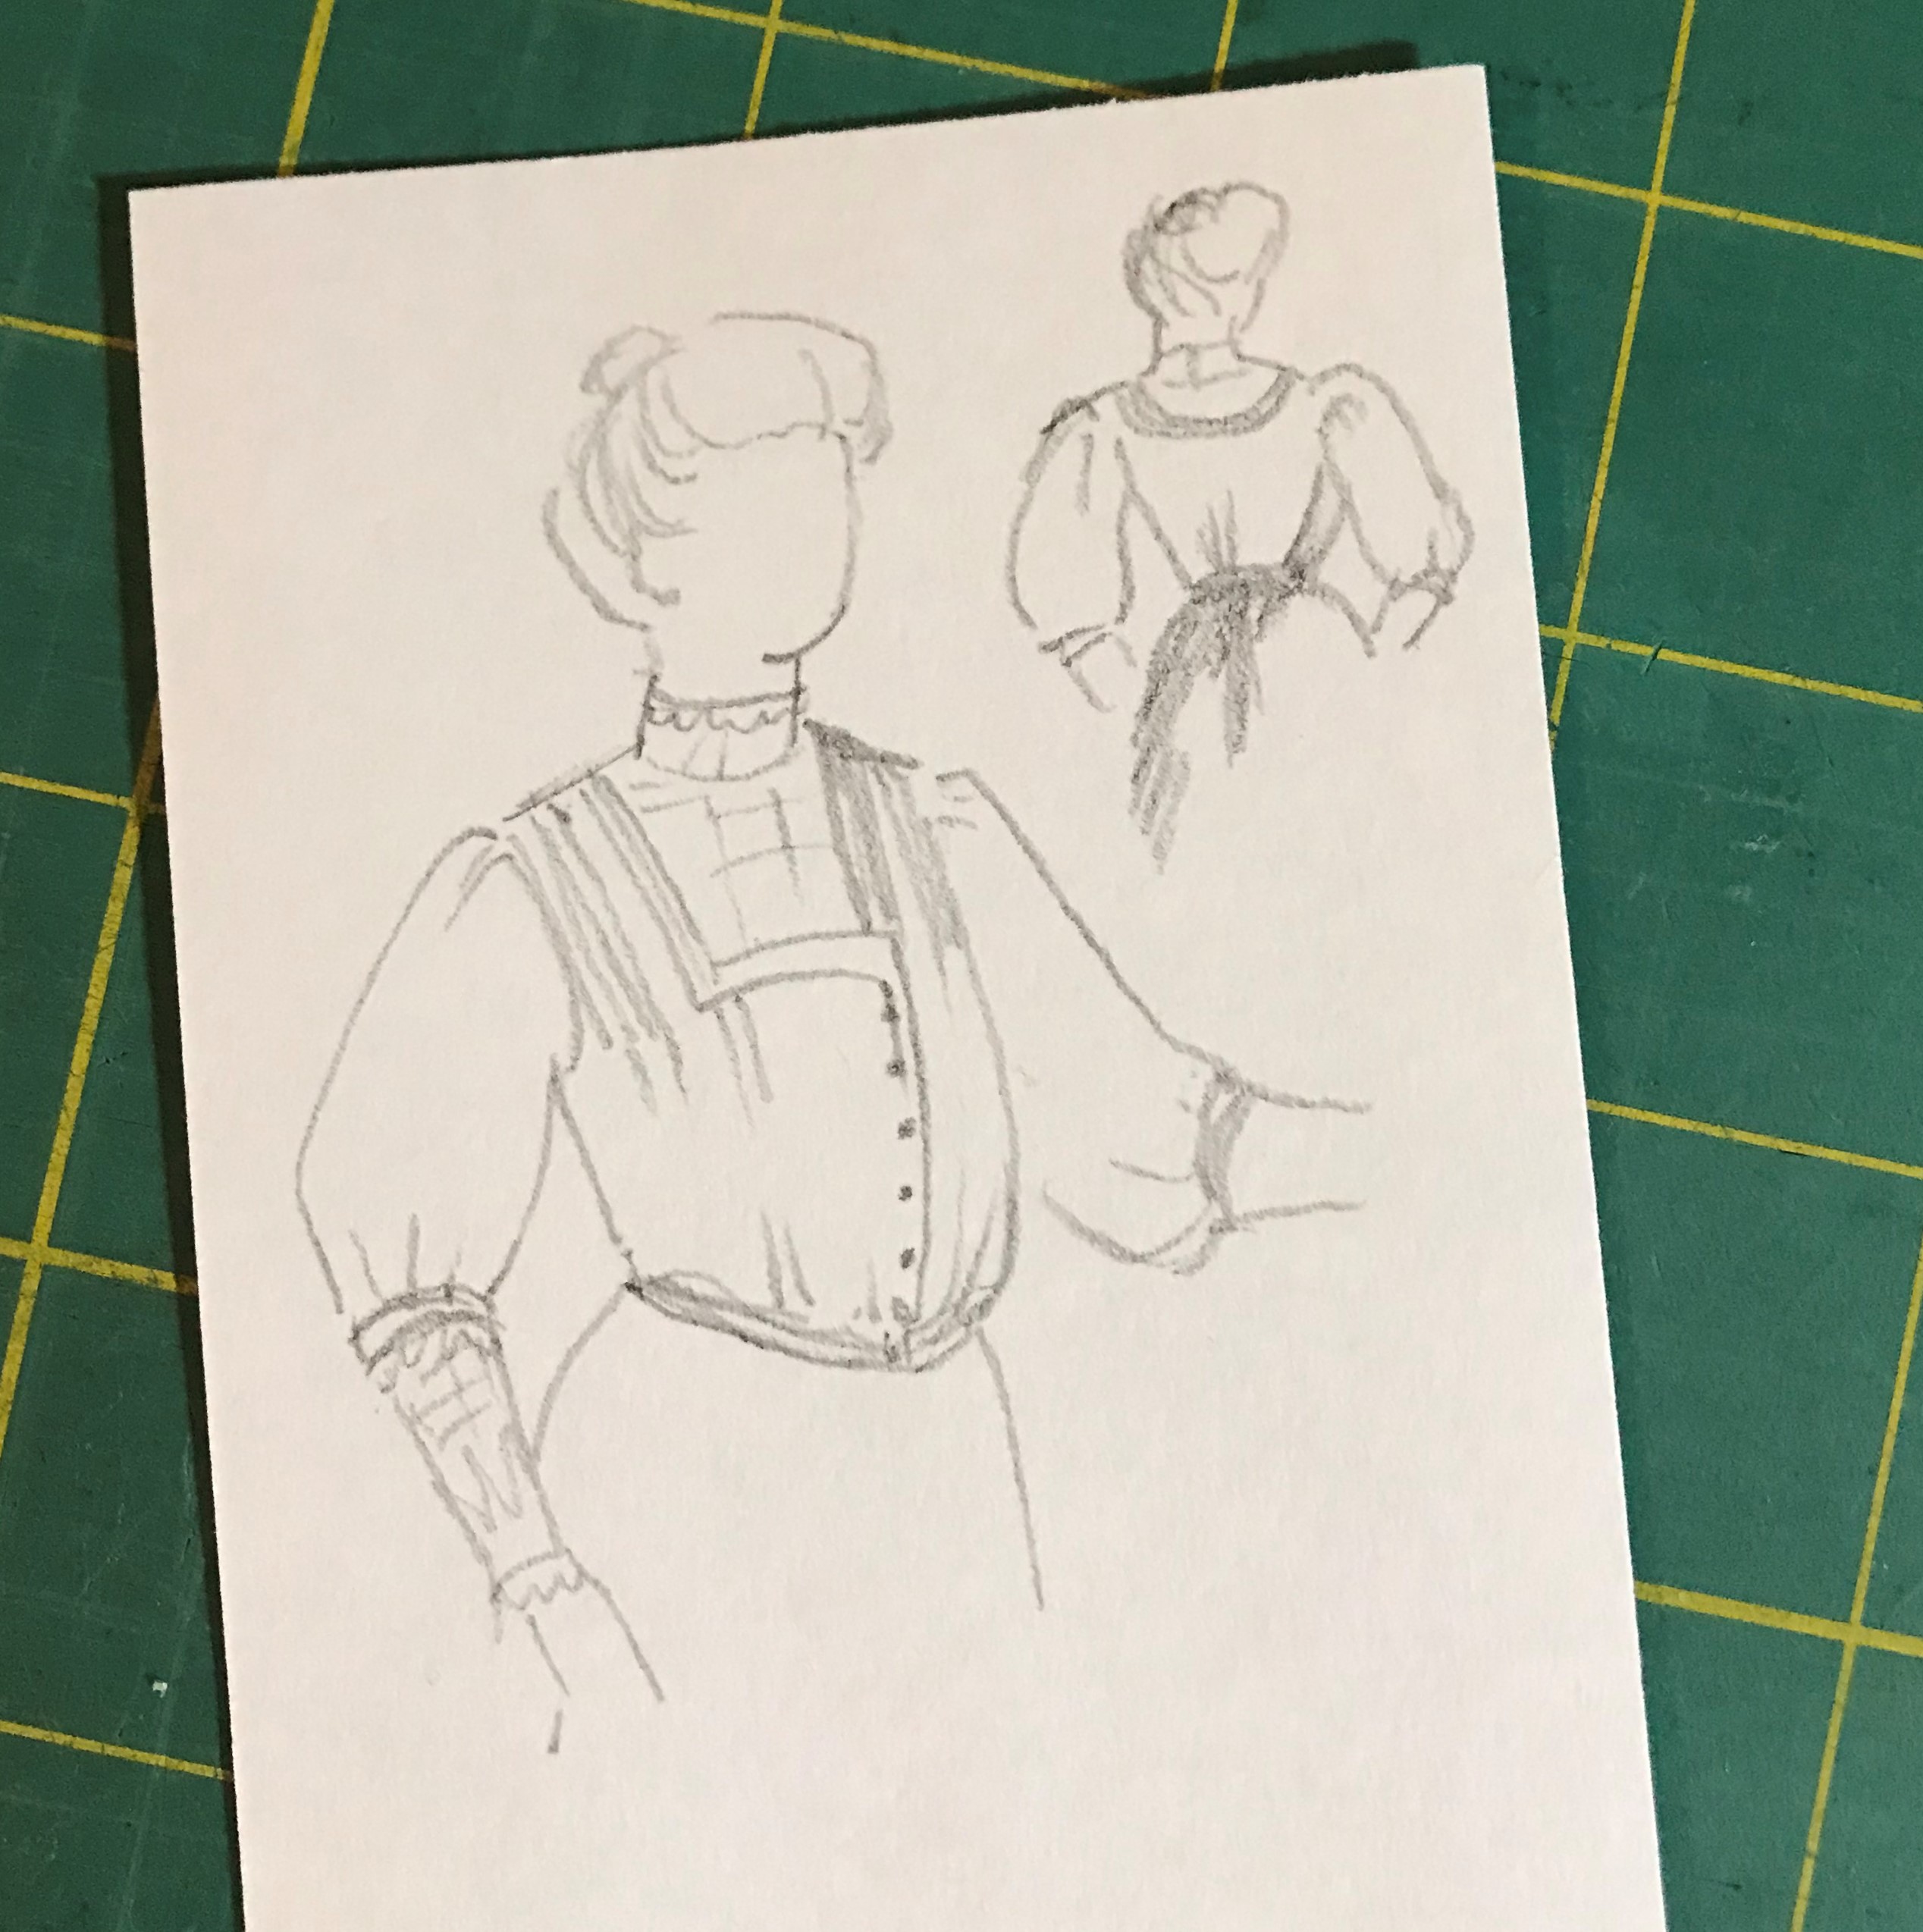 A rough sketch of the Party Waist design